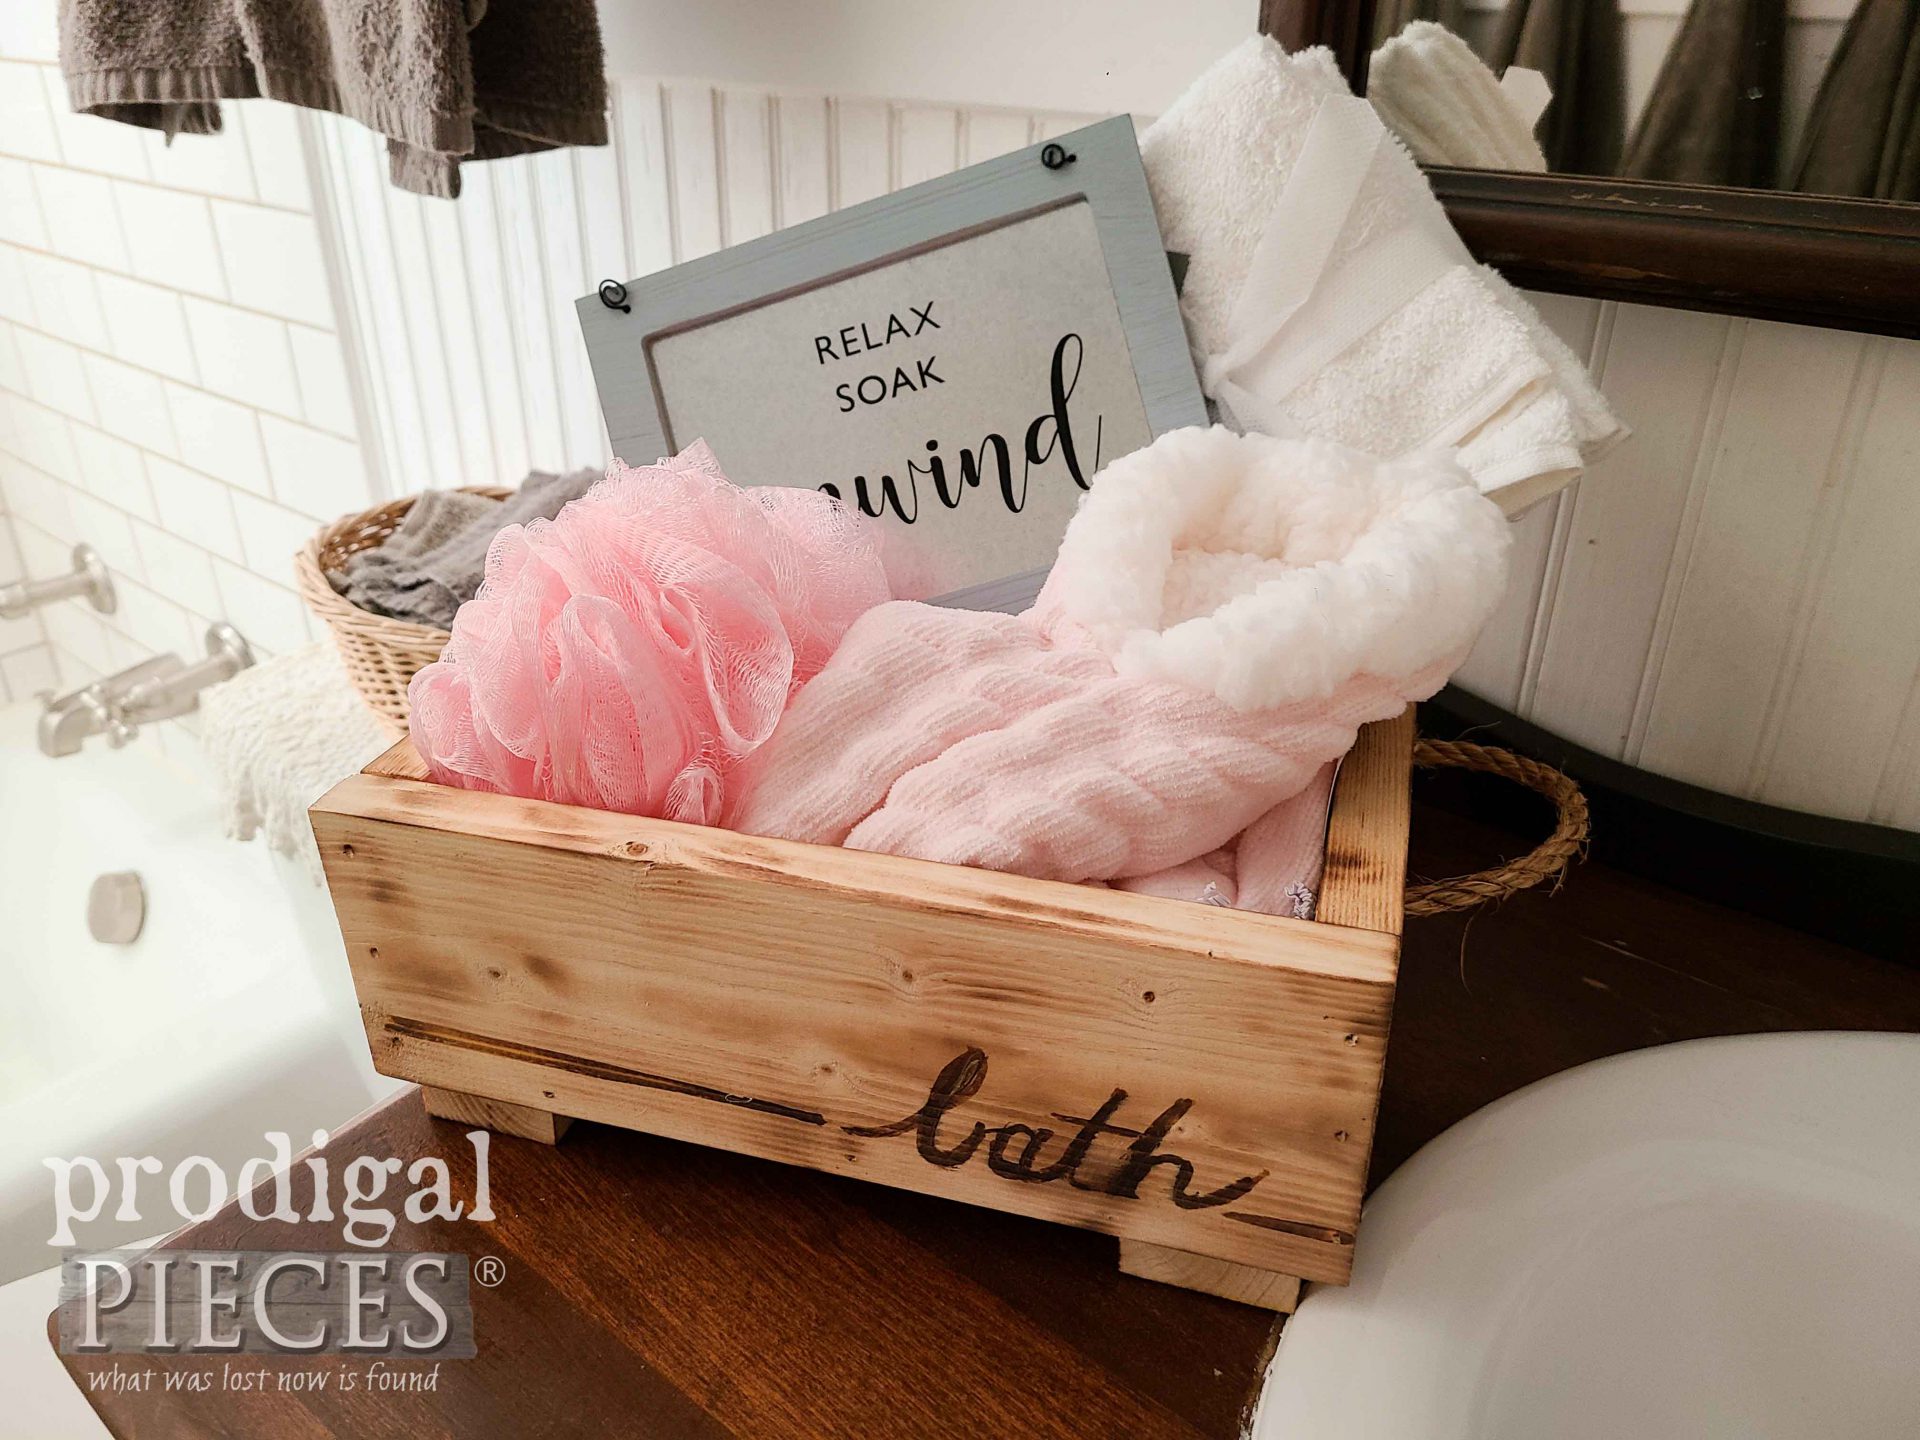 Rustic Gift Box For Bath by Larissa of Prodigal Pieces | prodigalpieces.com #prodigalpieces #bath #handmade #gift #christmas #home #homedecor